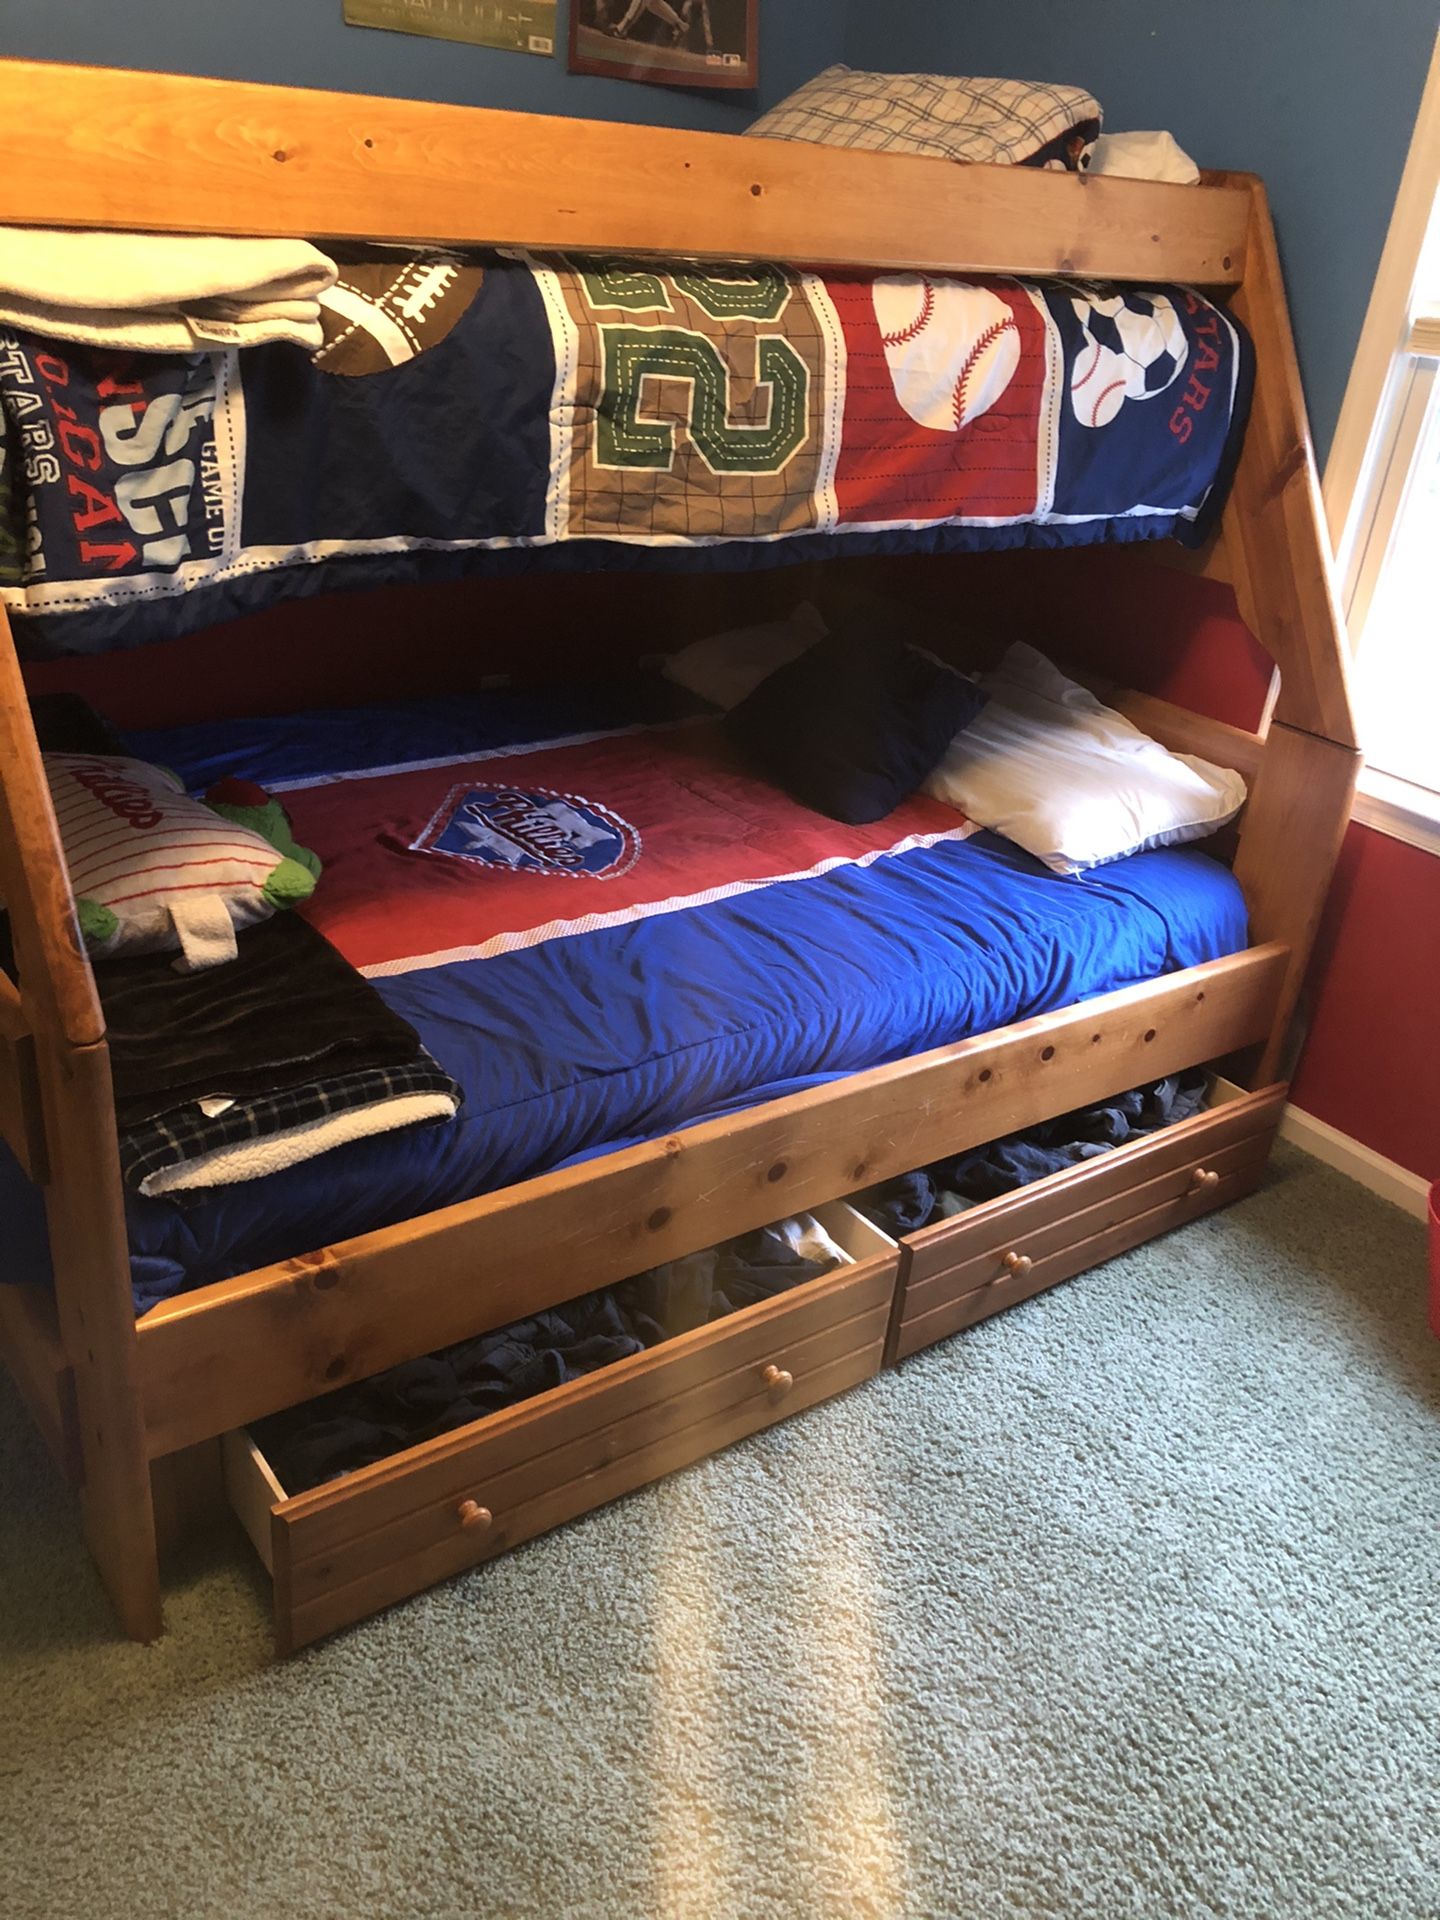 Solid wood bunk bed and dresser